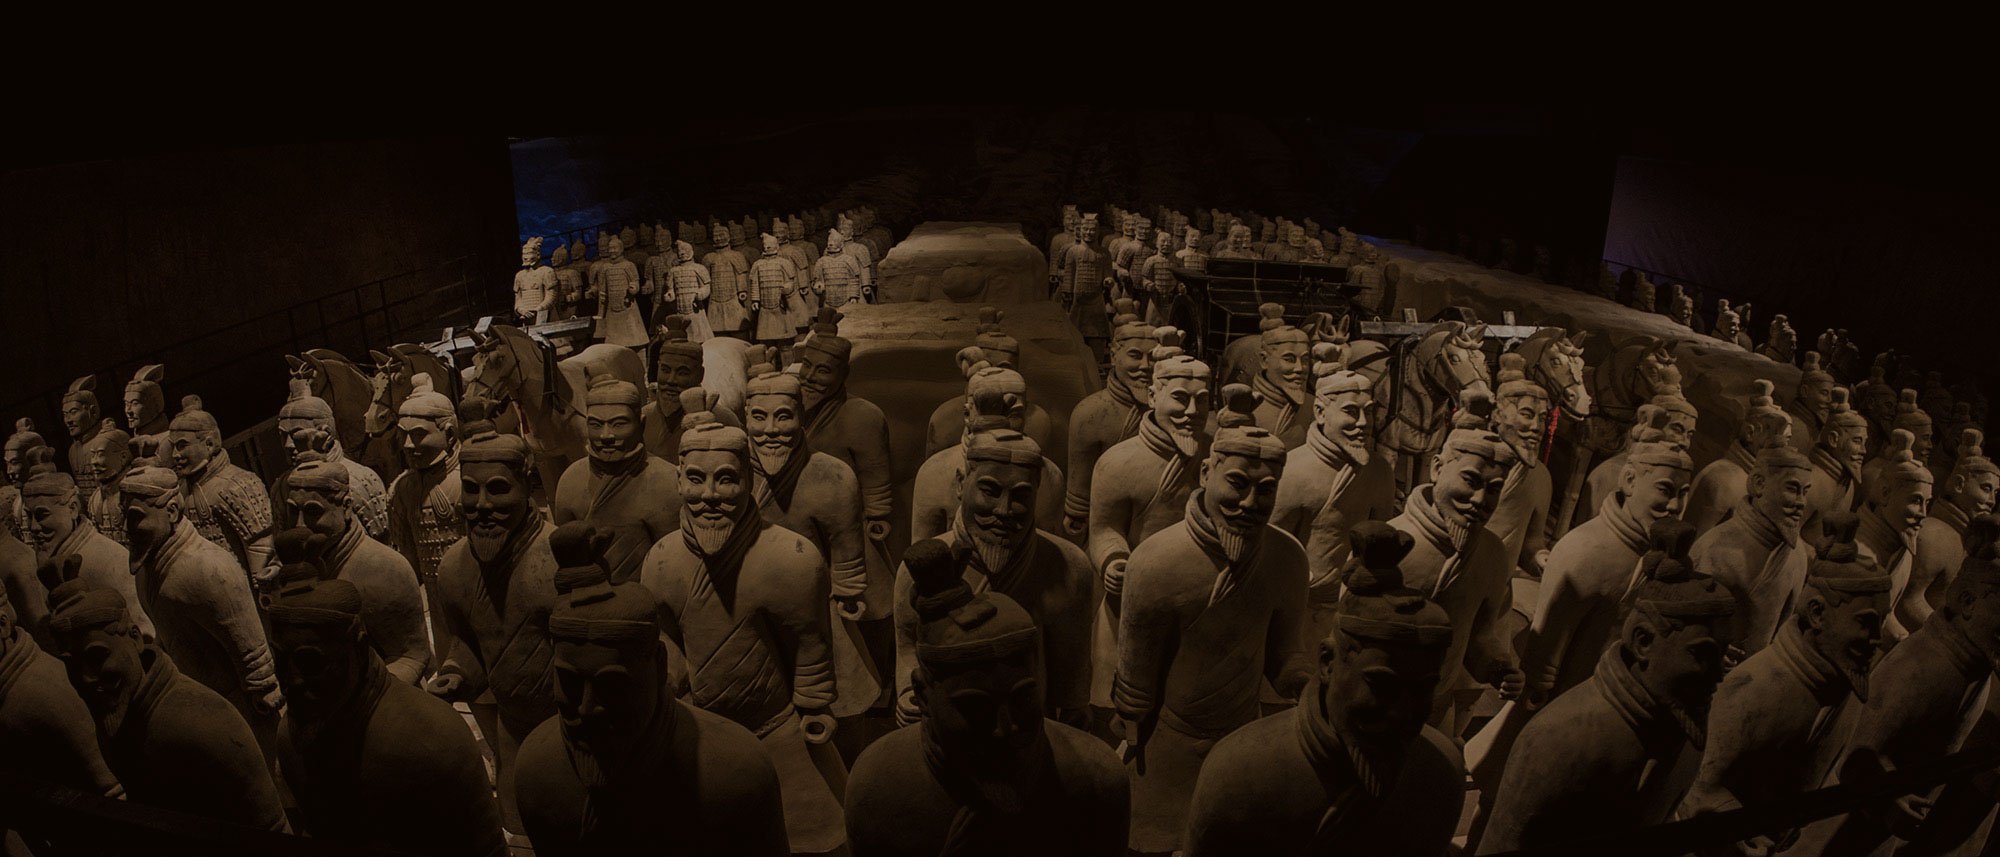 Terracotta Army exhibition in china